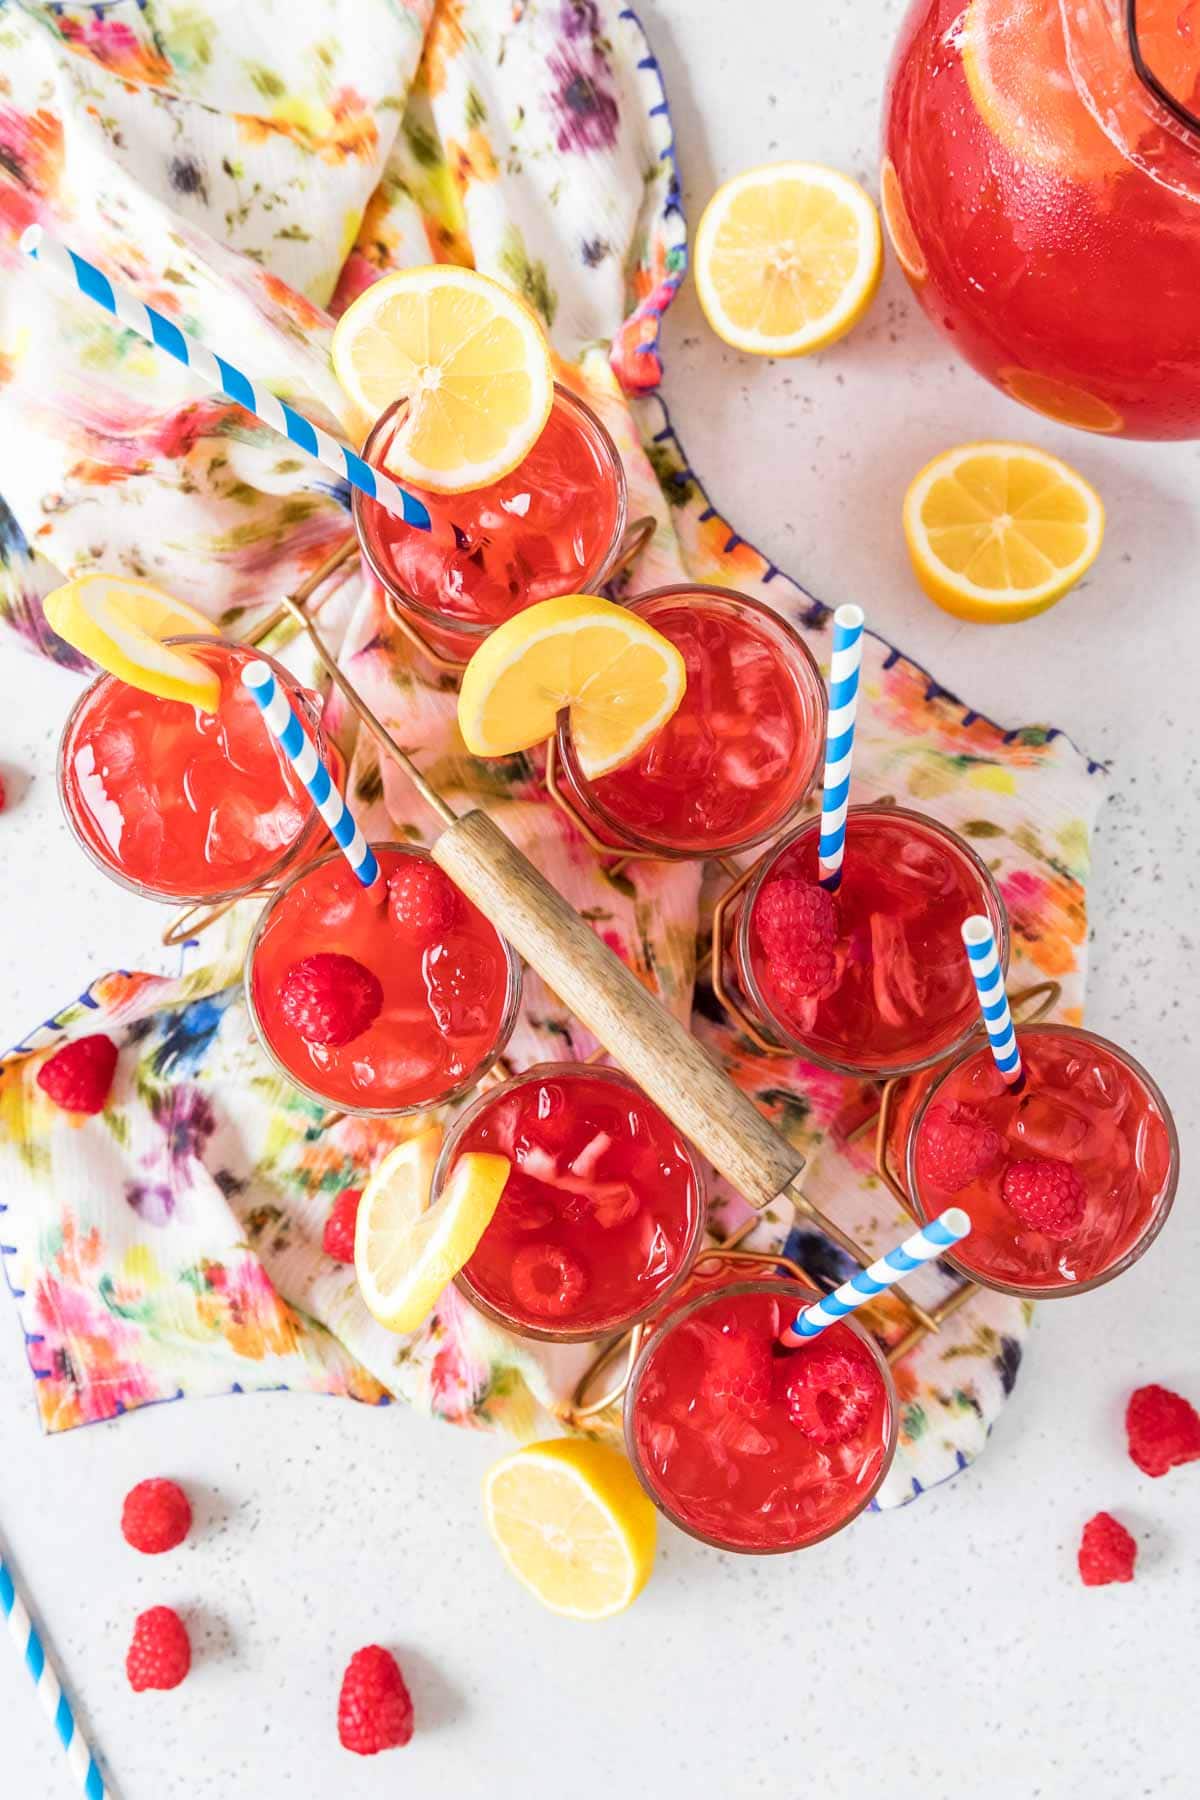 Overhead view of eight glasses of red raspberry lemonade garnished with lemon slices and topped with striped blue and white straws.